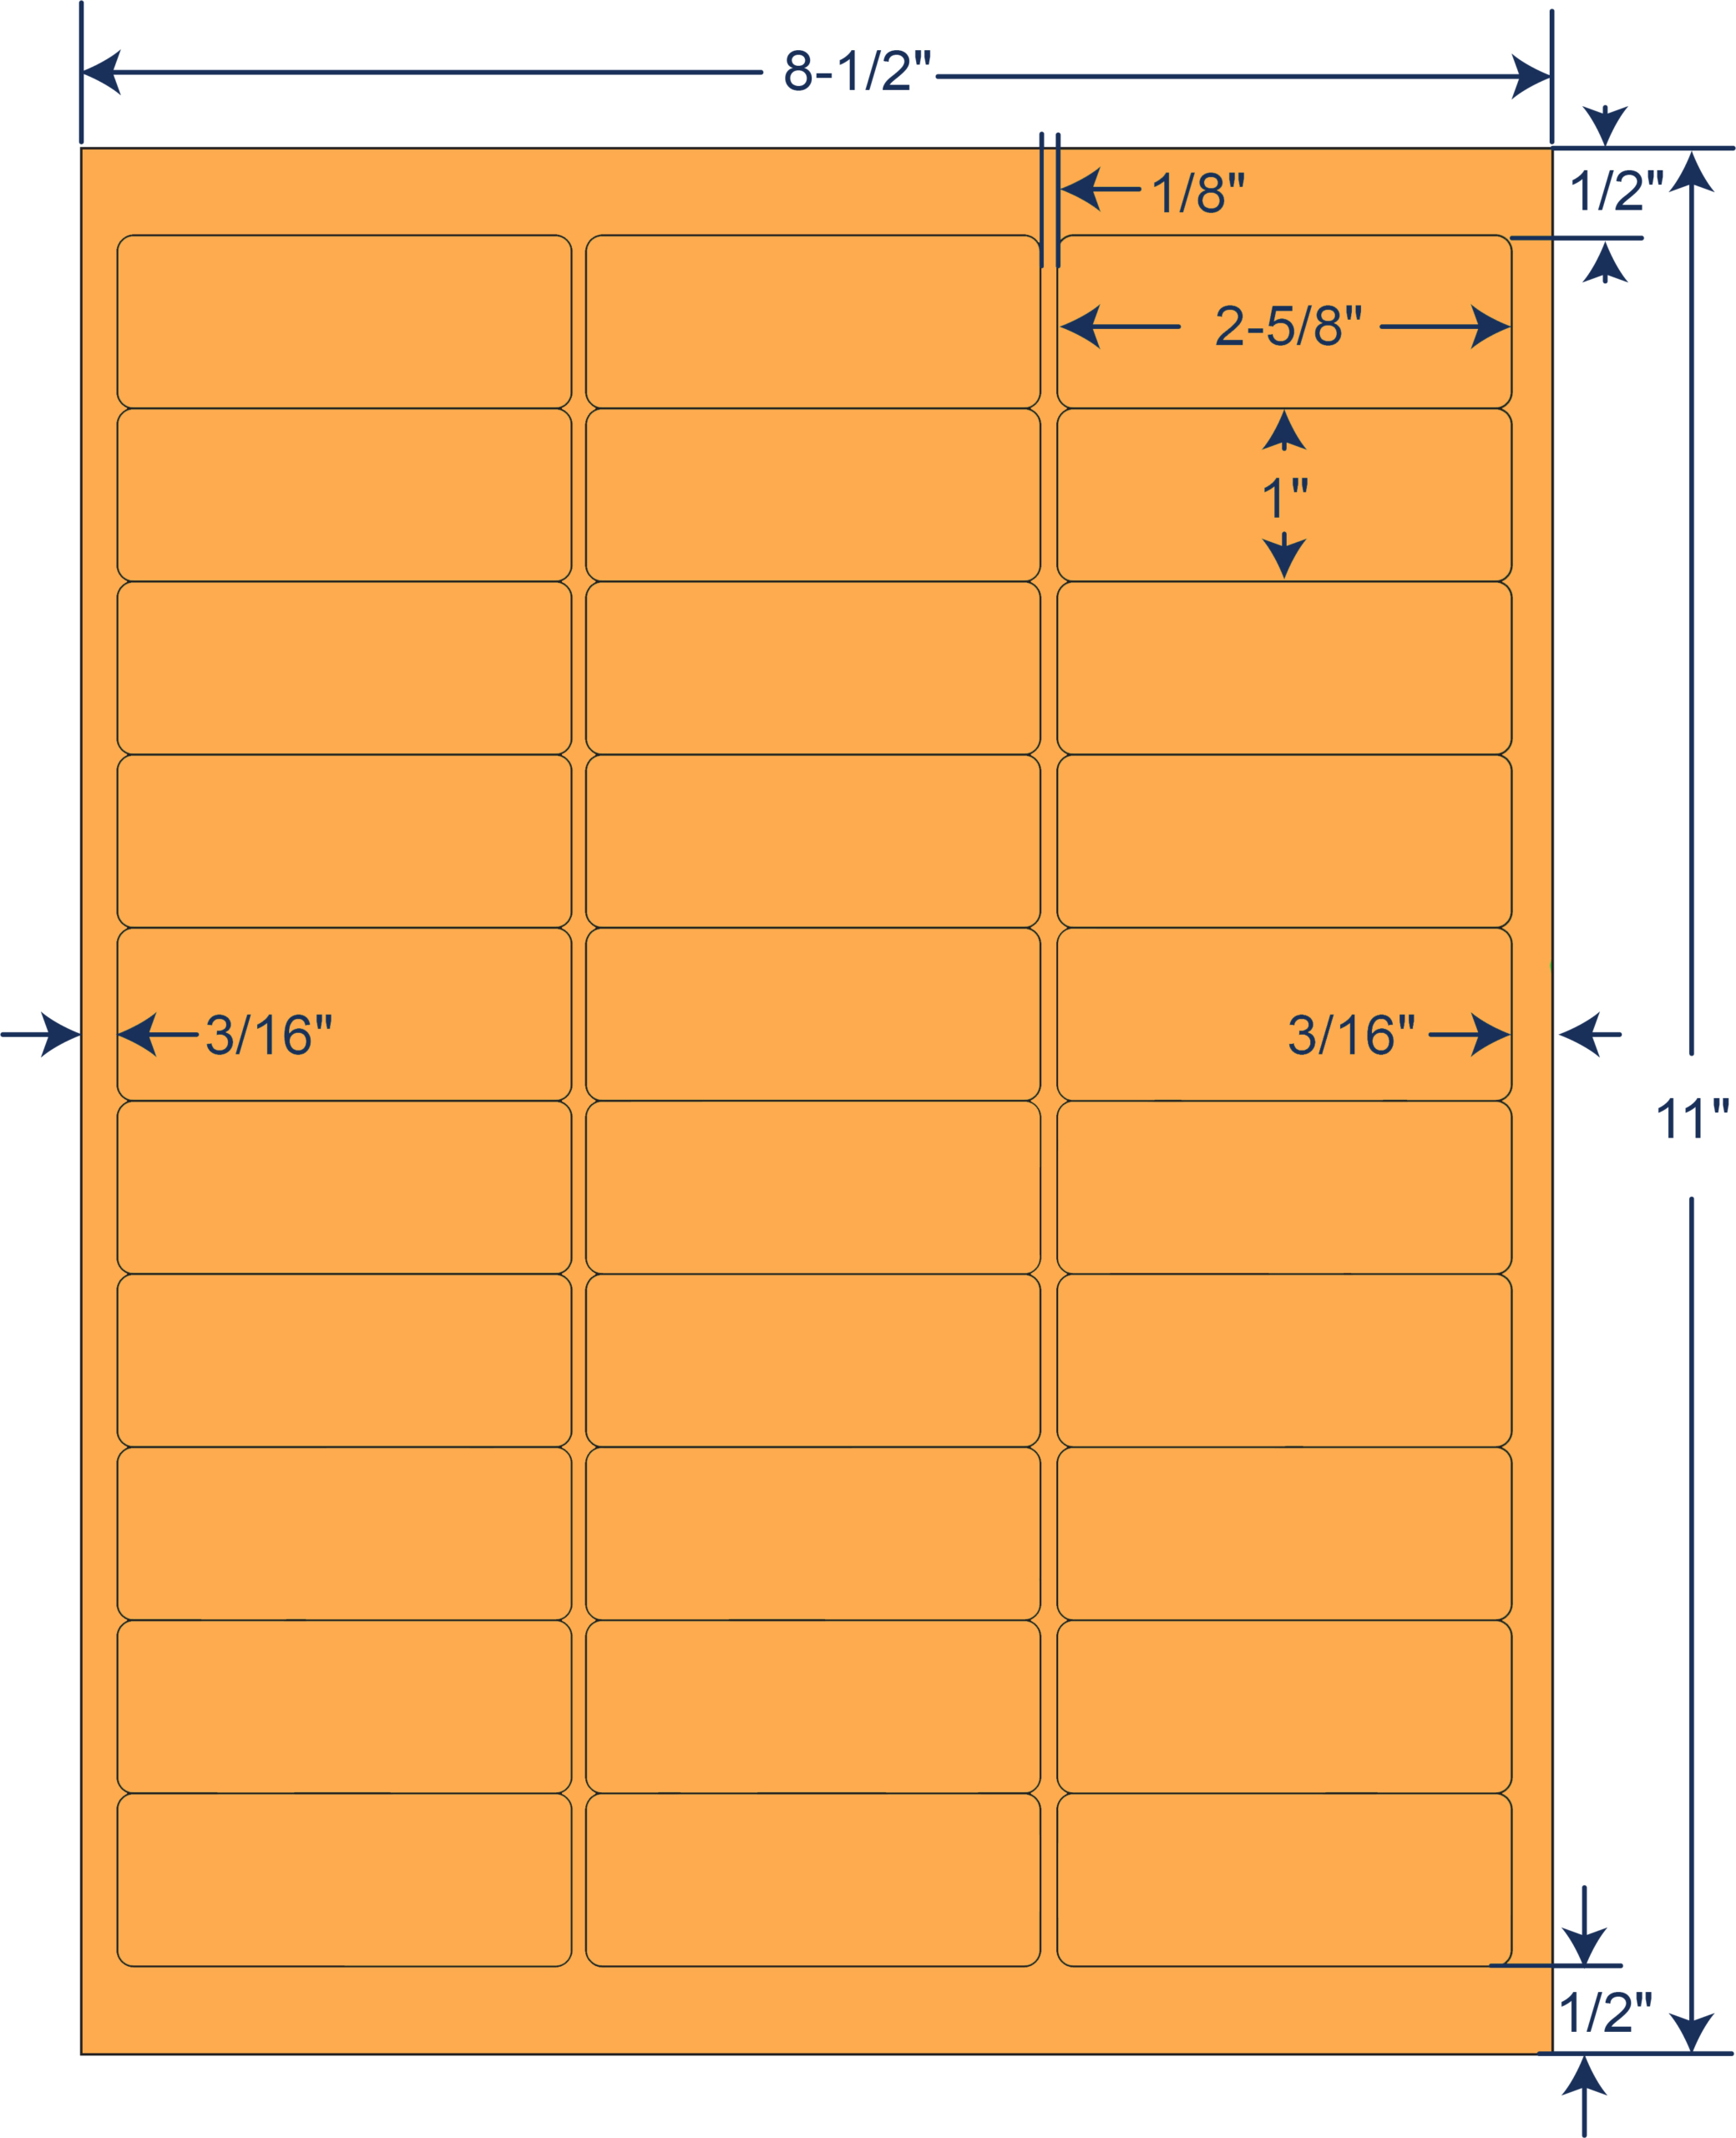 2-5/8" x 1" Fluorescent Orange Sheeted Labels (1,000 Sheets)